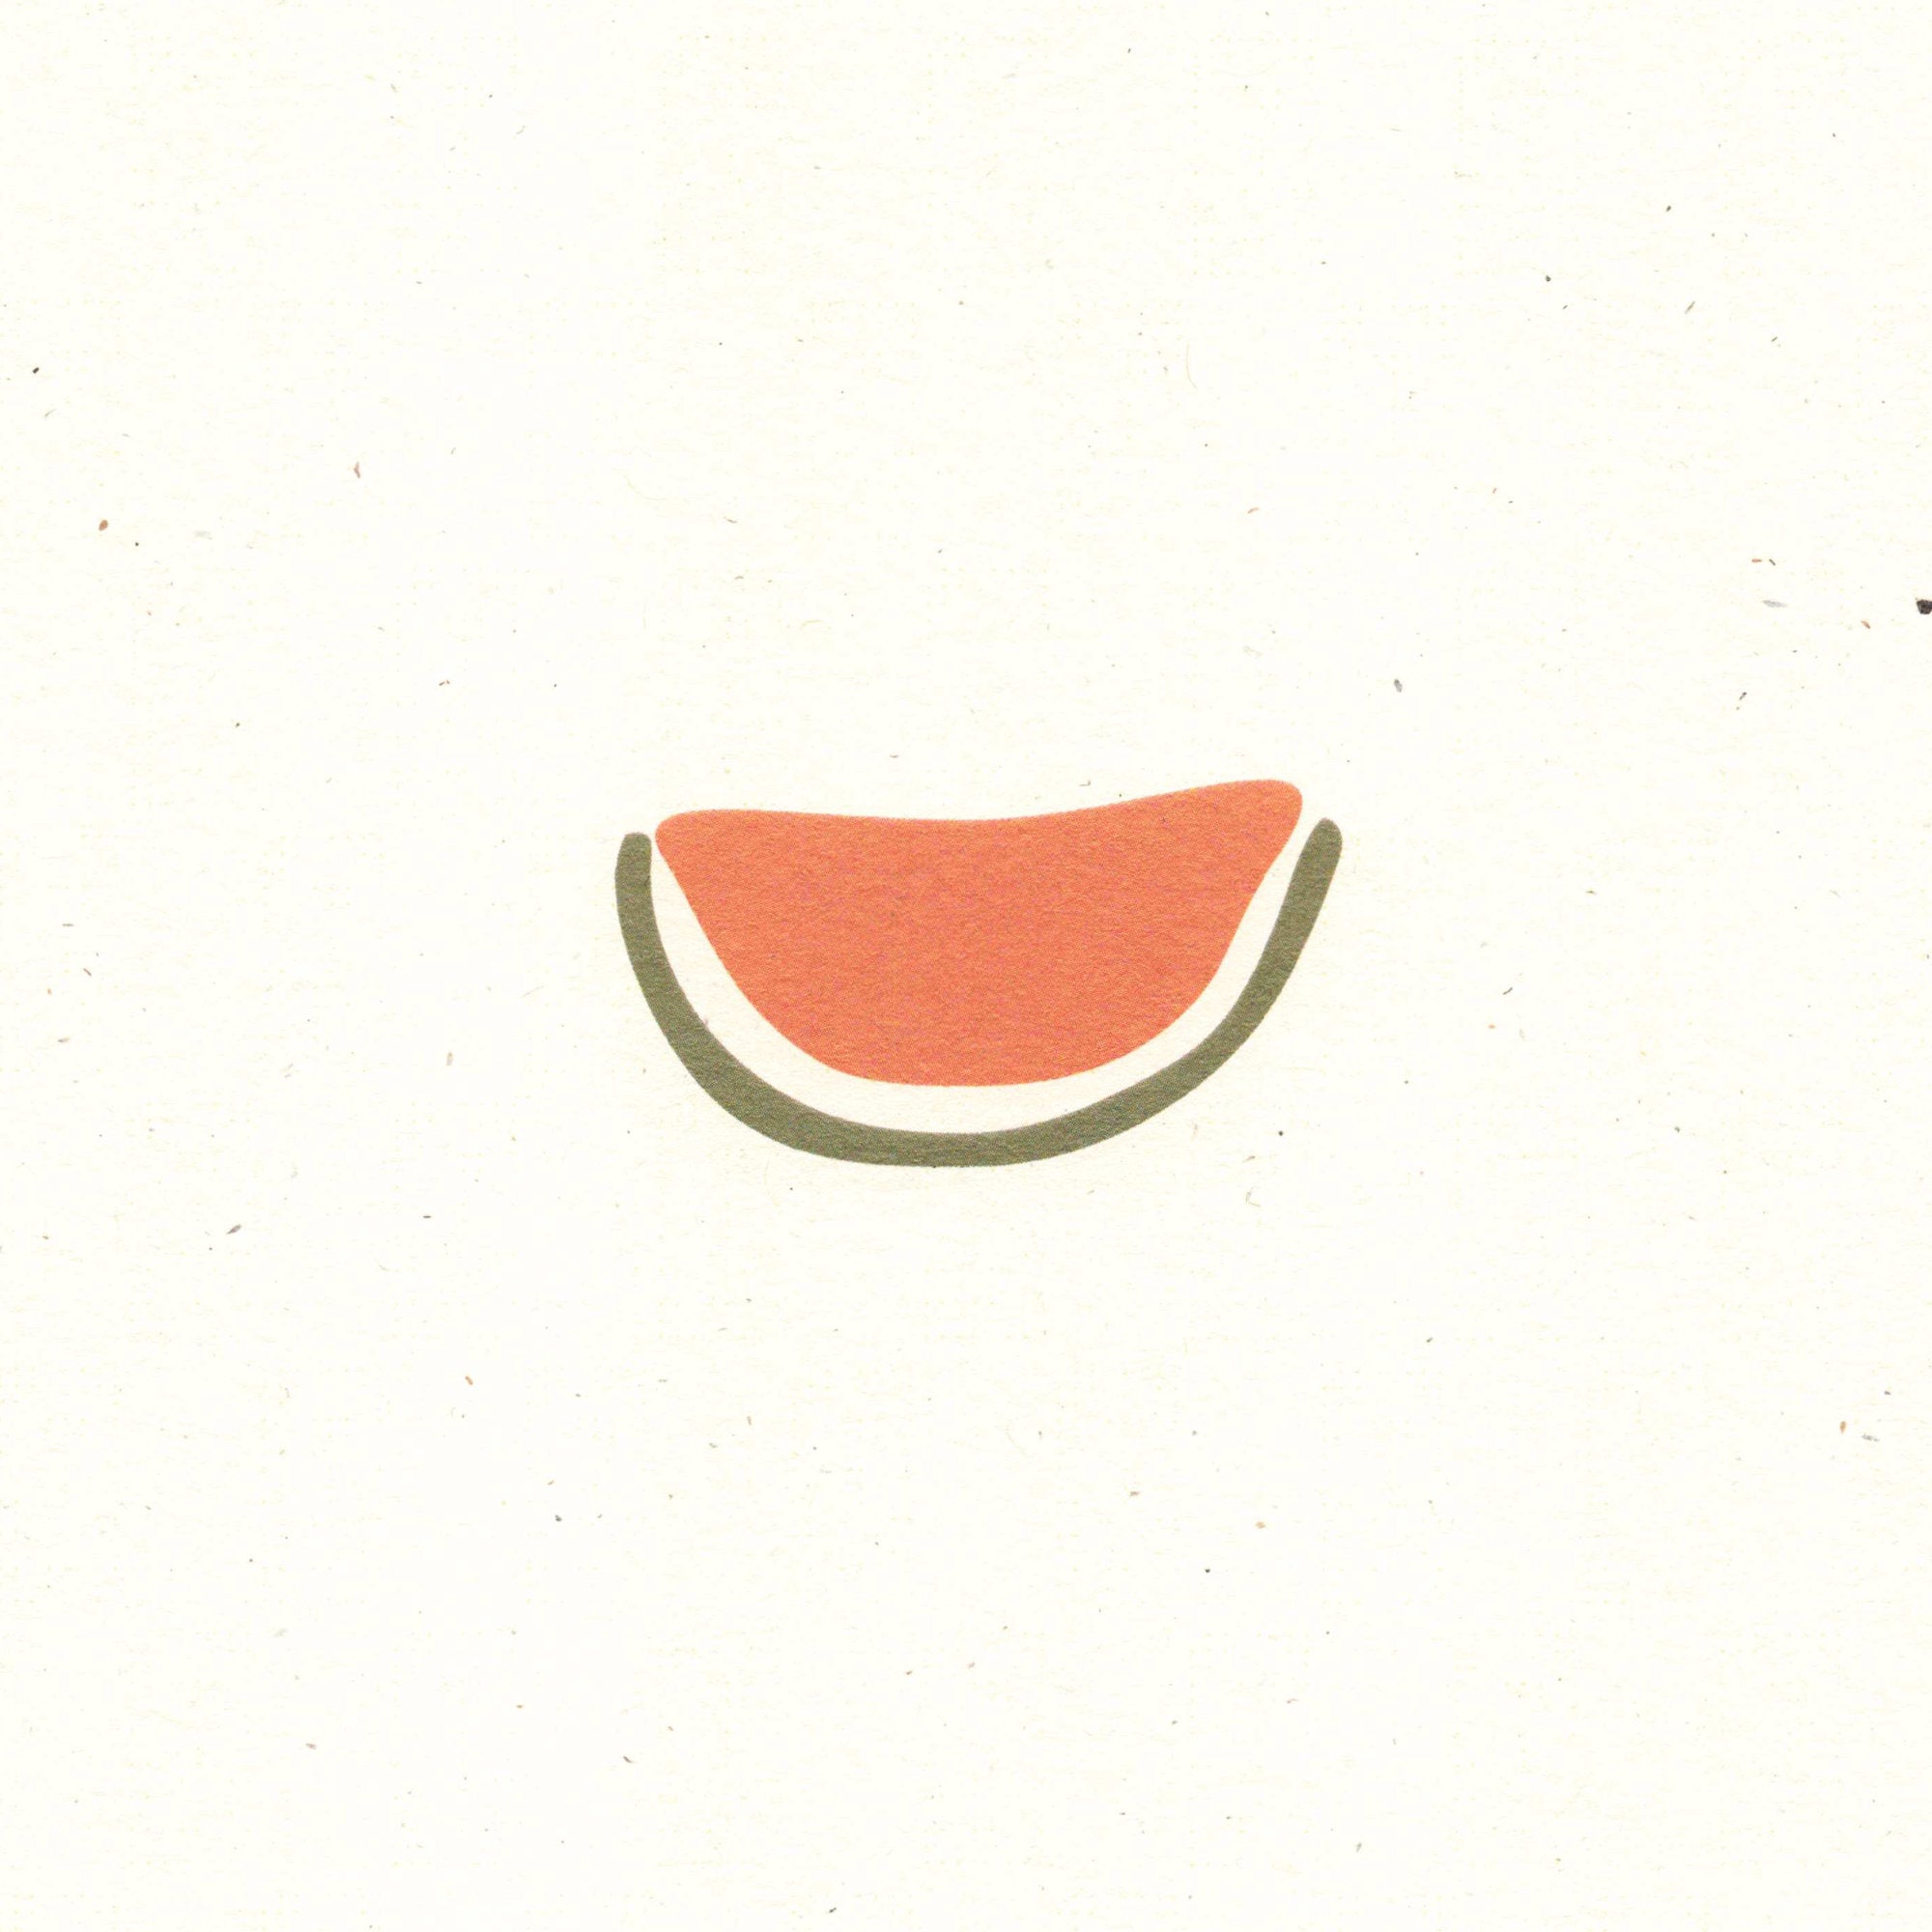 A close-up view of the watermelon design, printed on recycled, natural paper, with flecks visible in the paper surface.